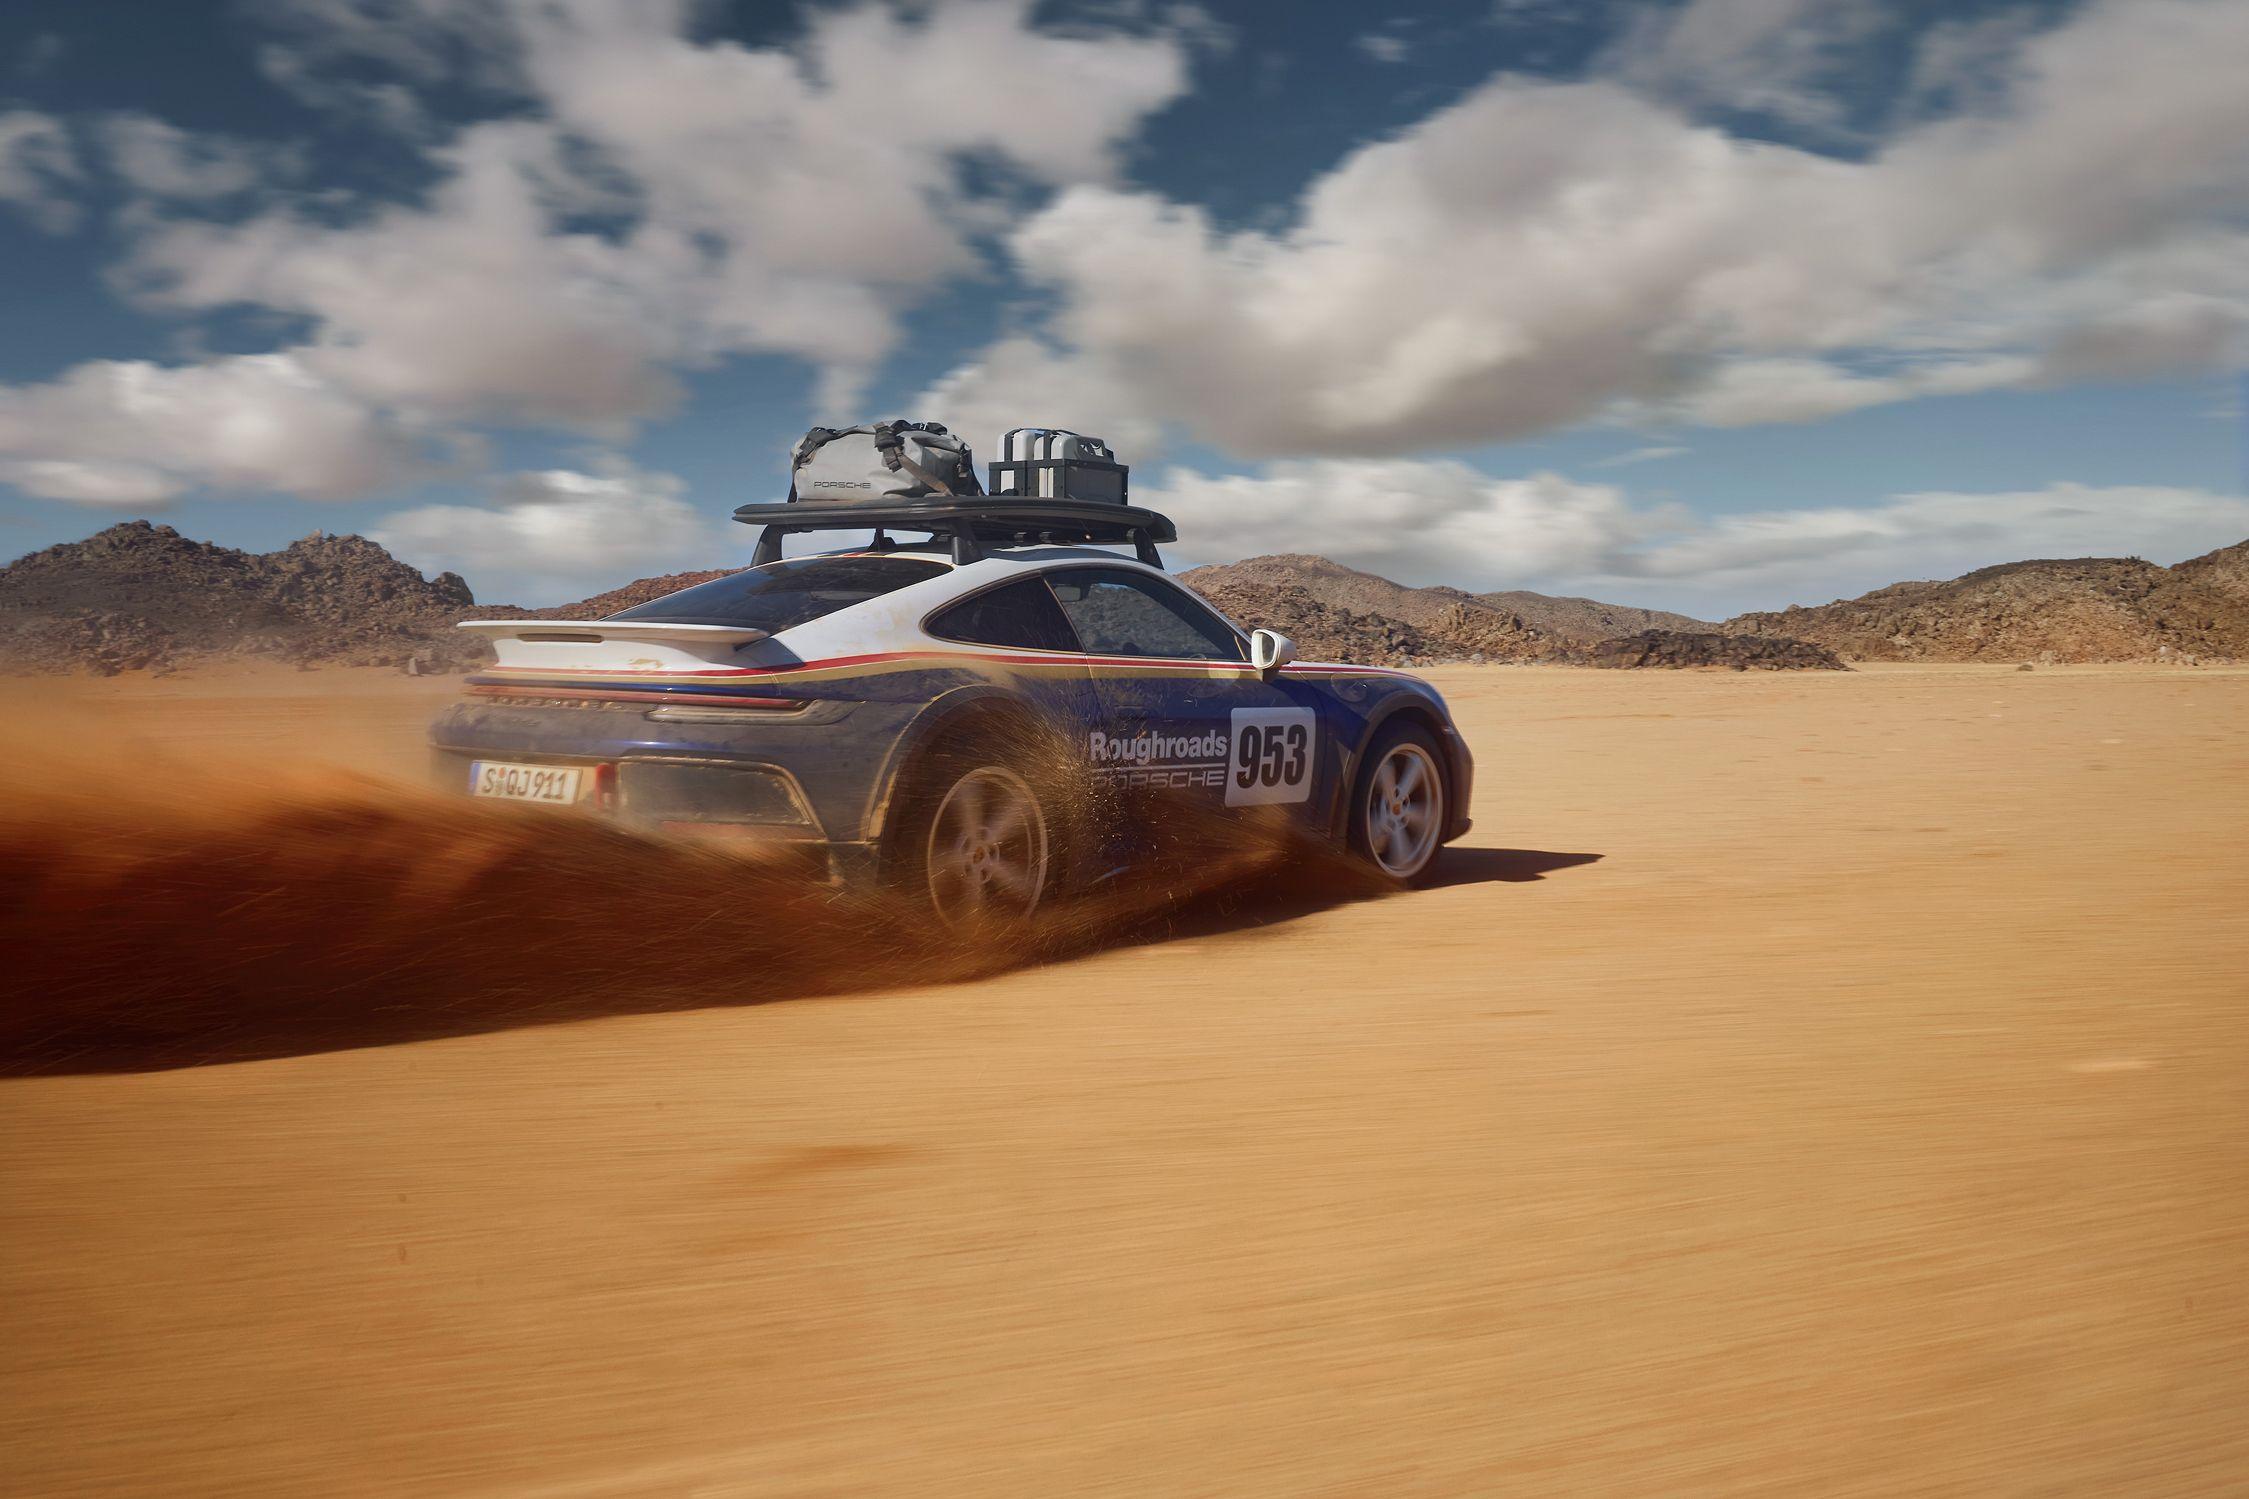 See The Porsche Dakar From Every Angle